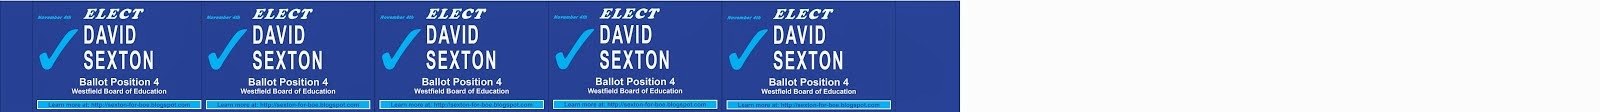 Dave Sexton for Westfield BOE